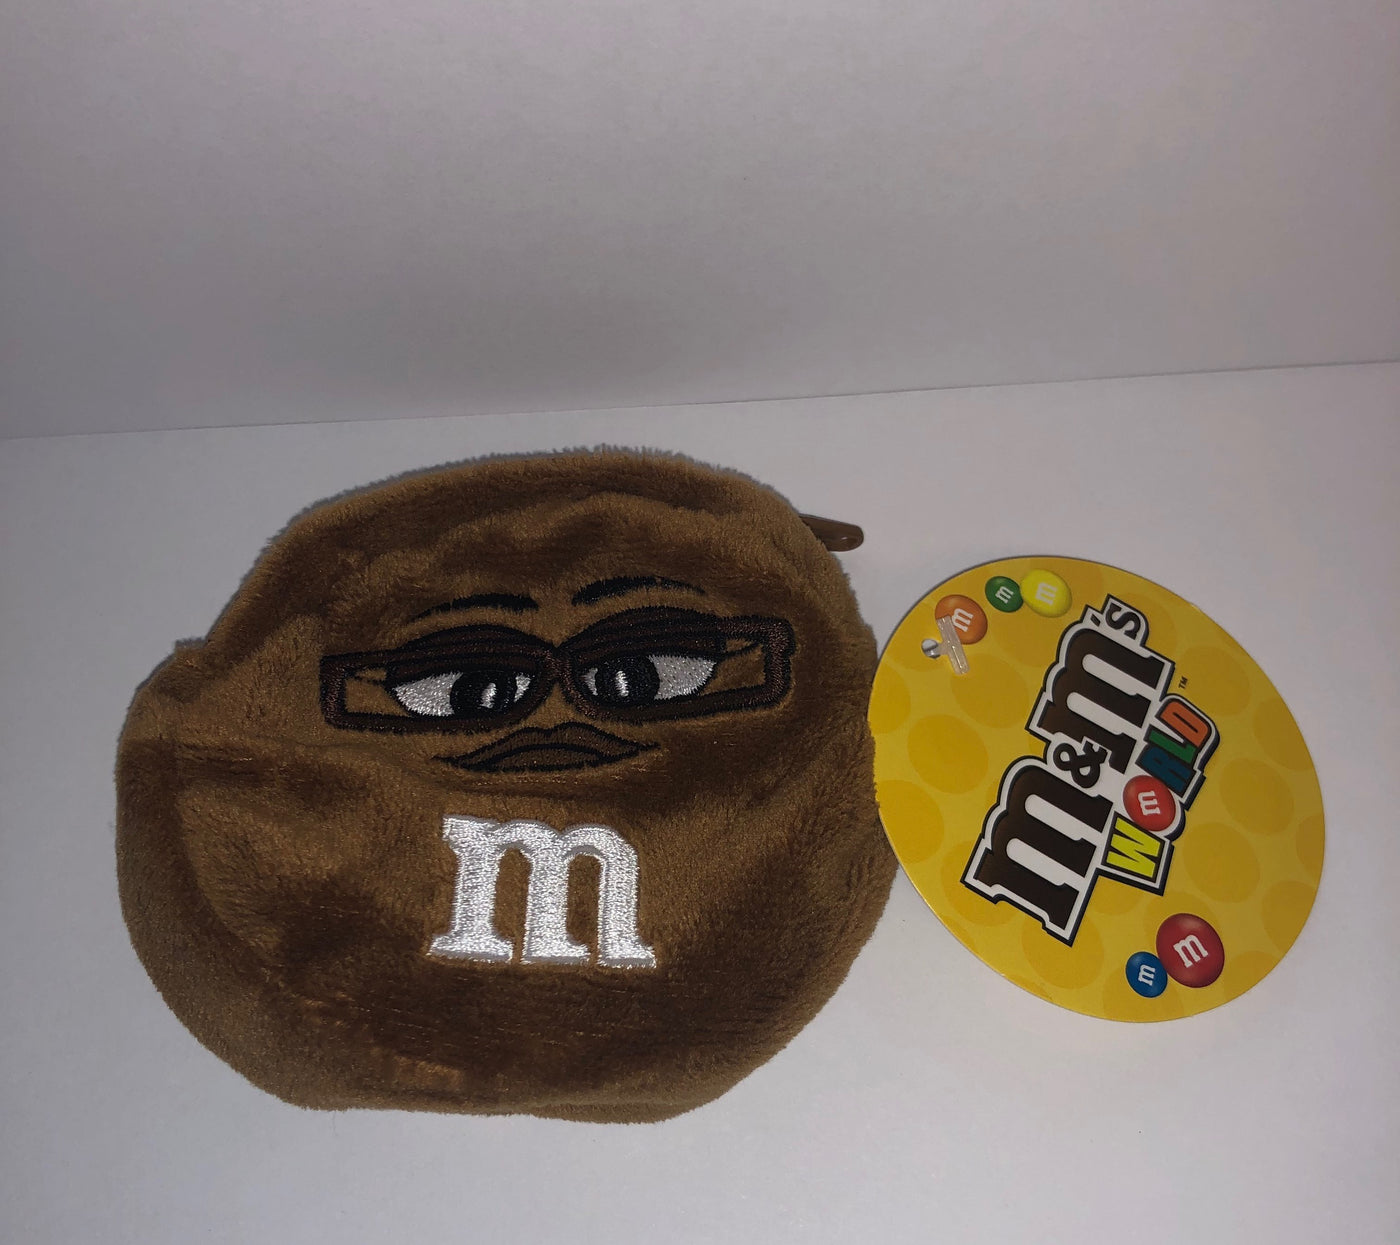 M&M's World Brown Character Coin Purse Plush New with Tags